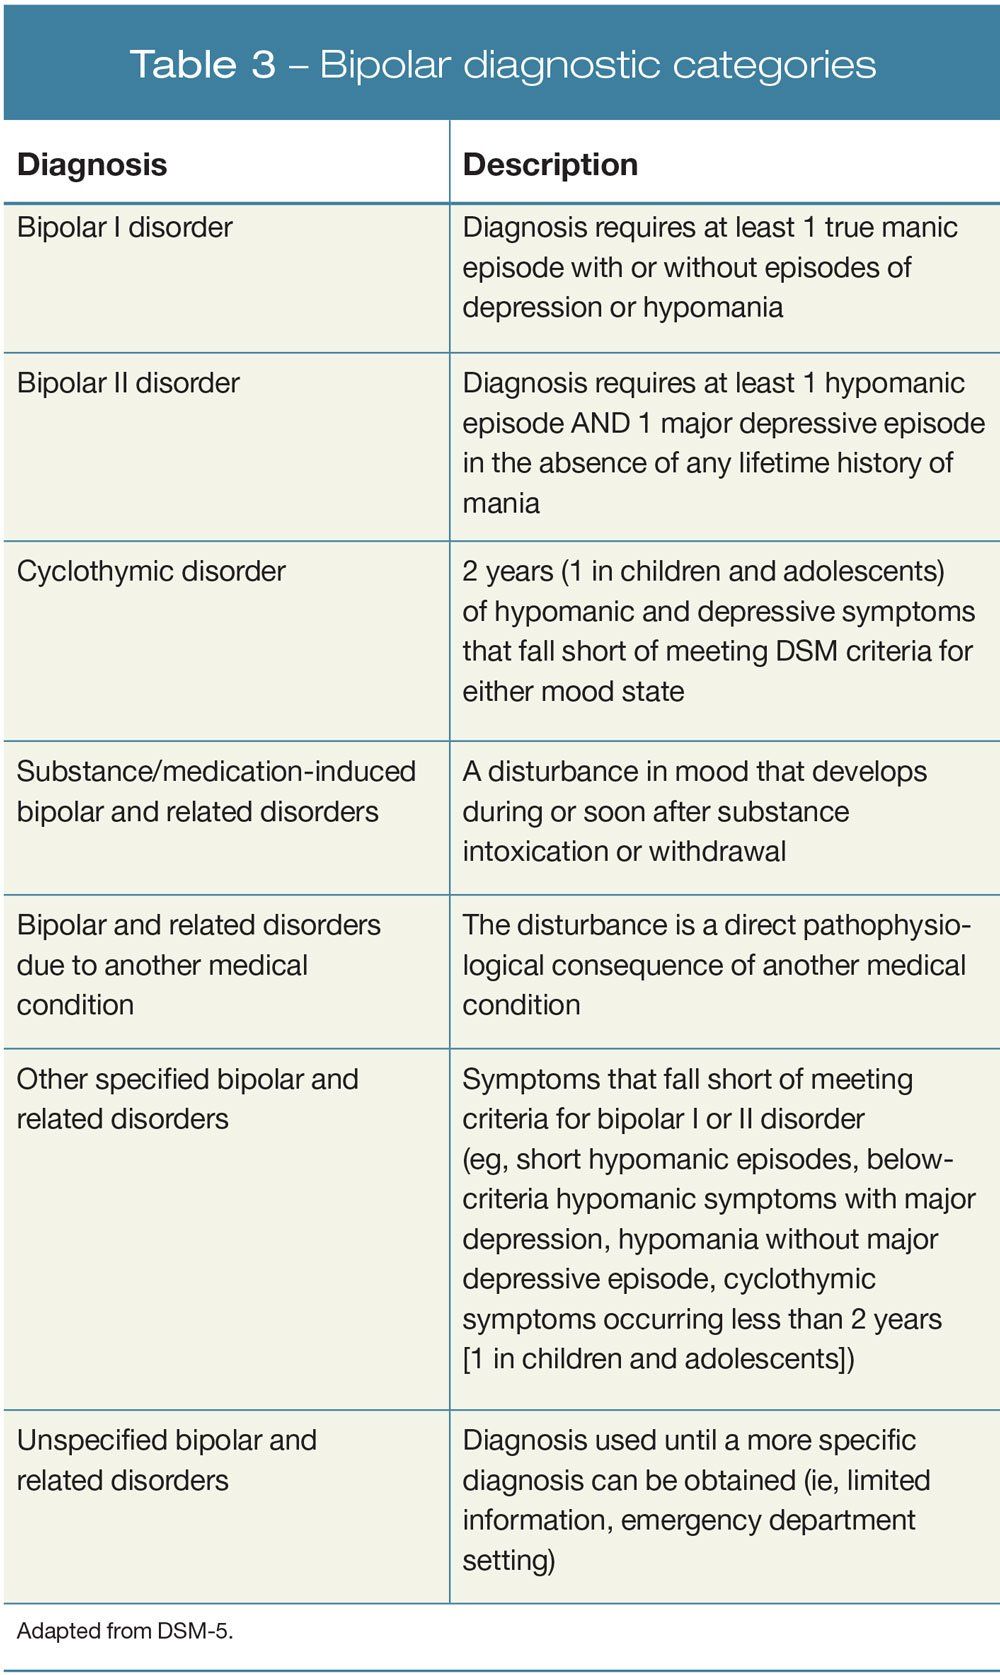 an-update-on-the-diagnosis-and-treatment-of-bipolar-disorder-part-1-mania